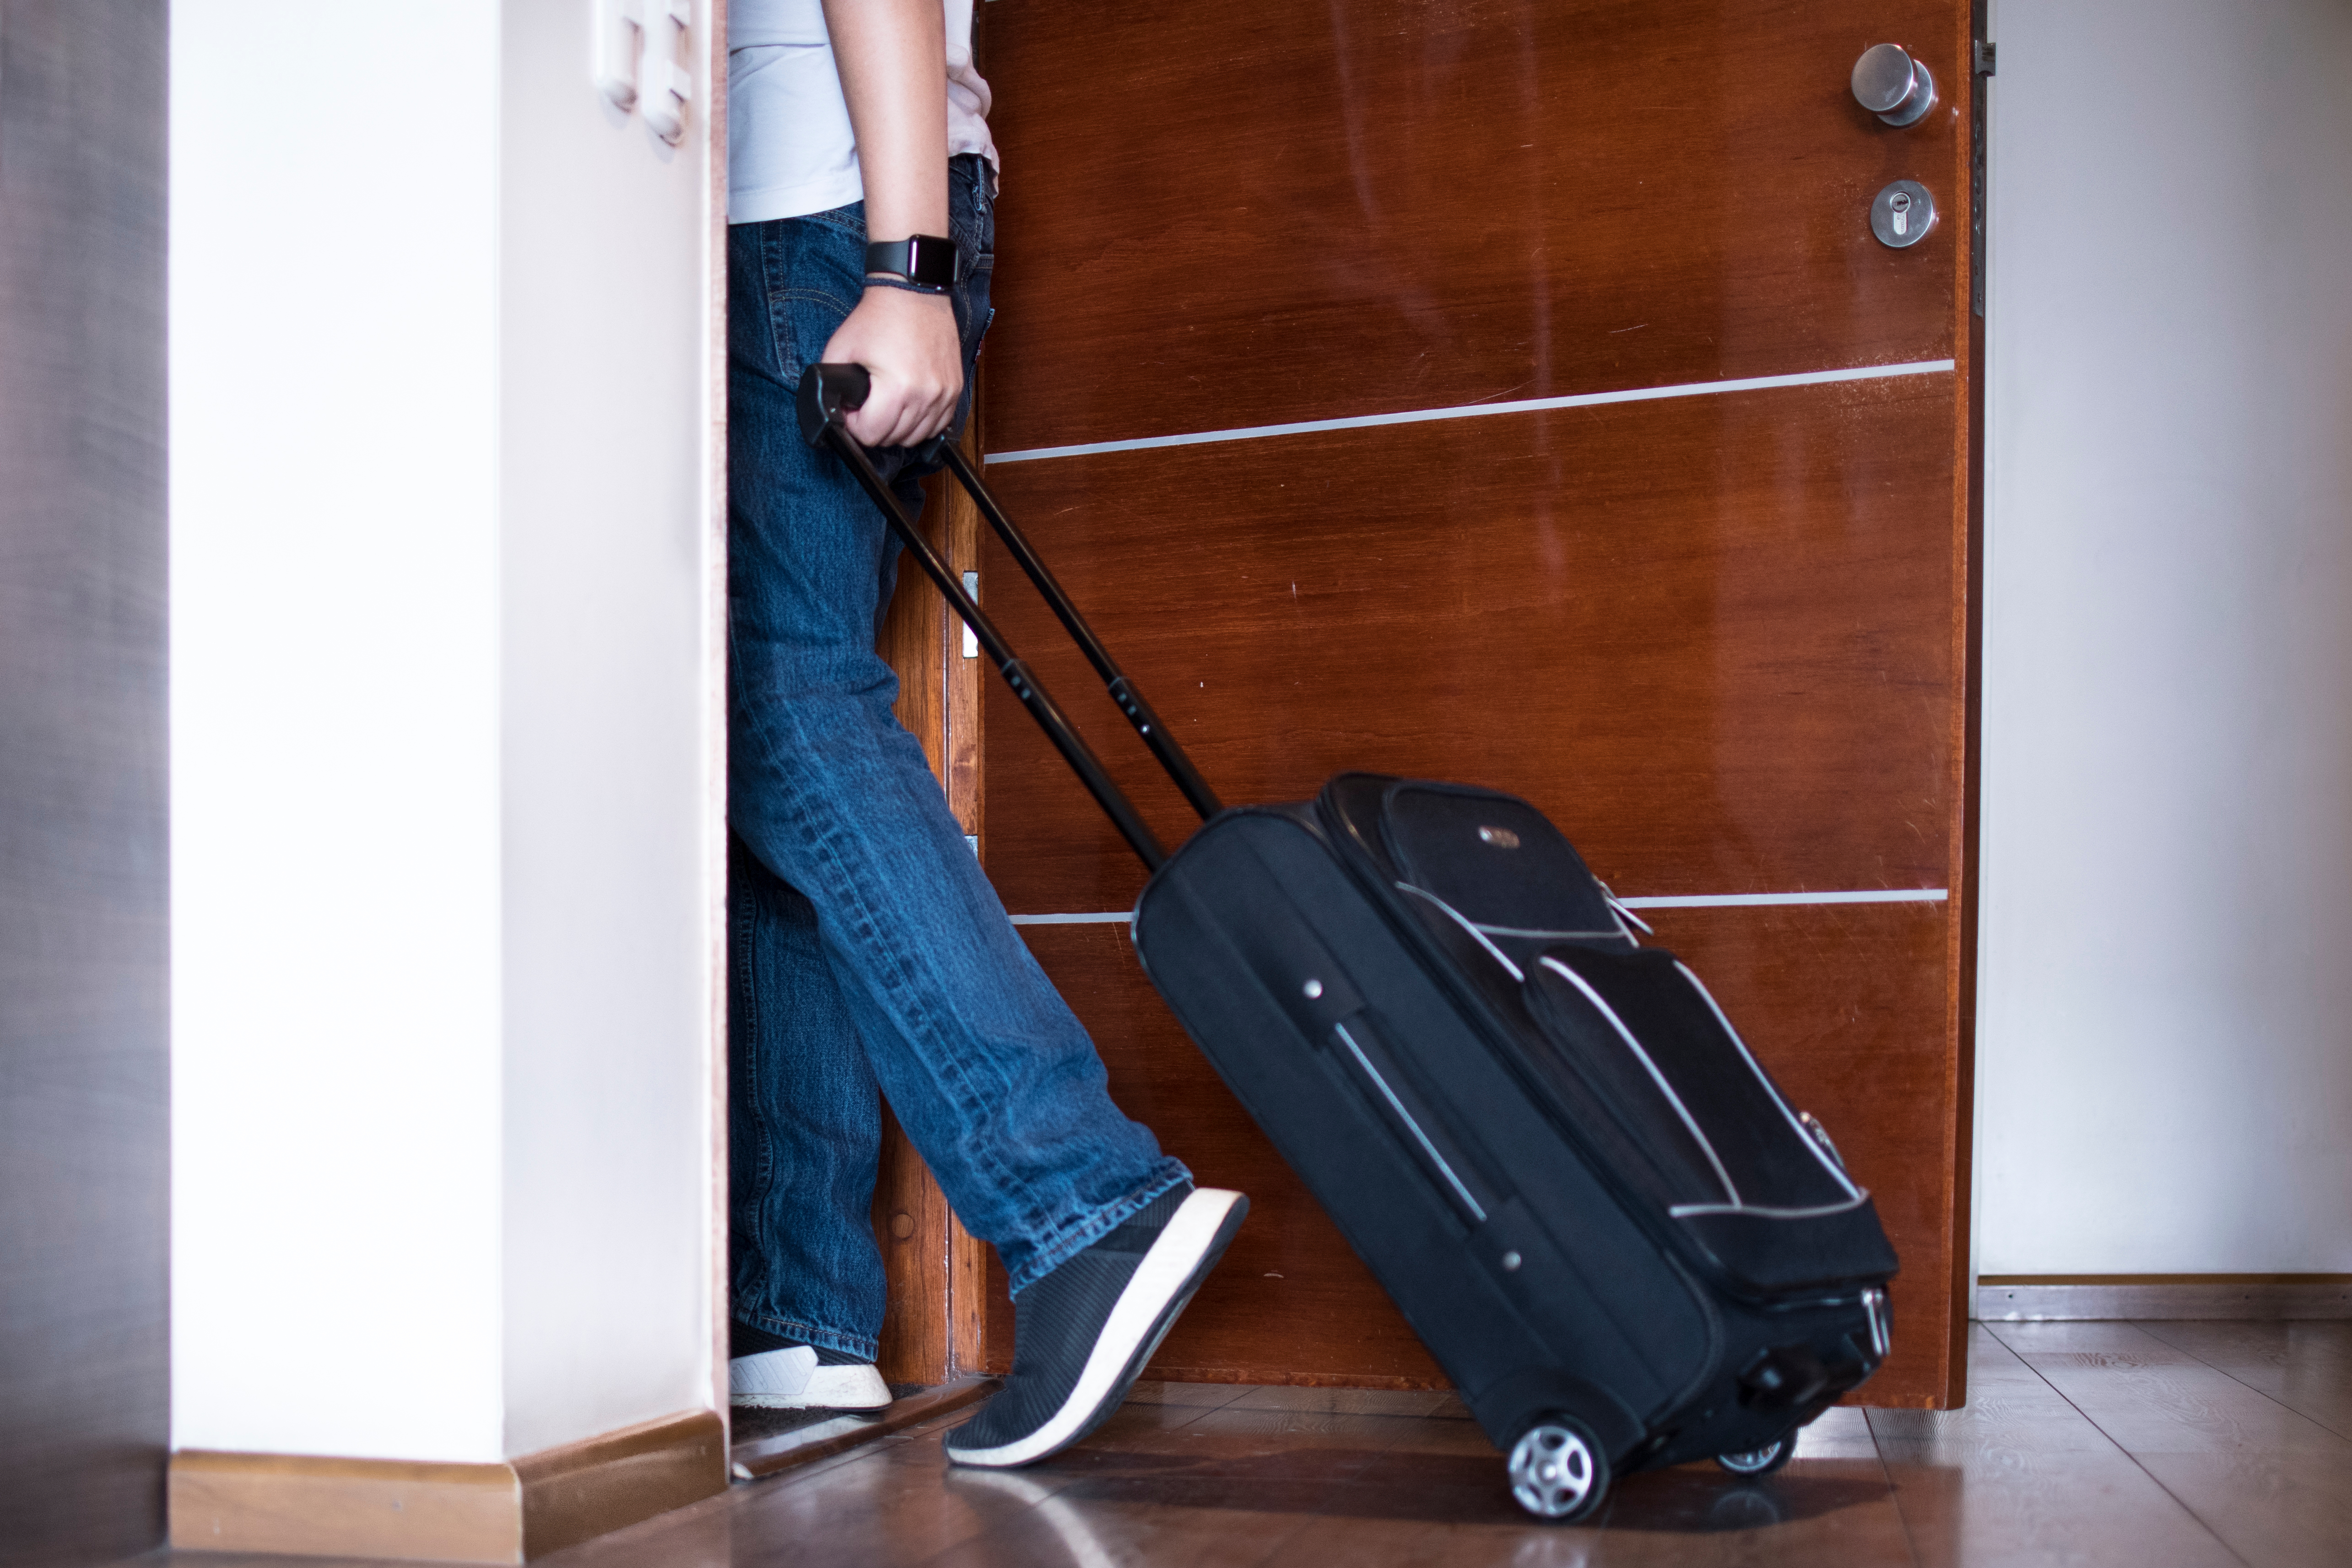 Man leaves house with his trolley luggage | Source: Shutterstock.com